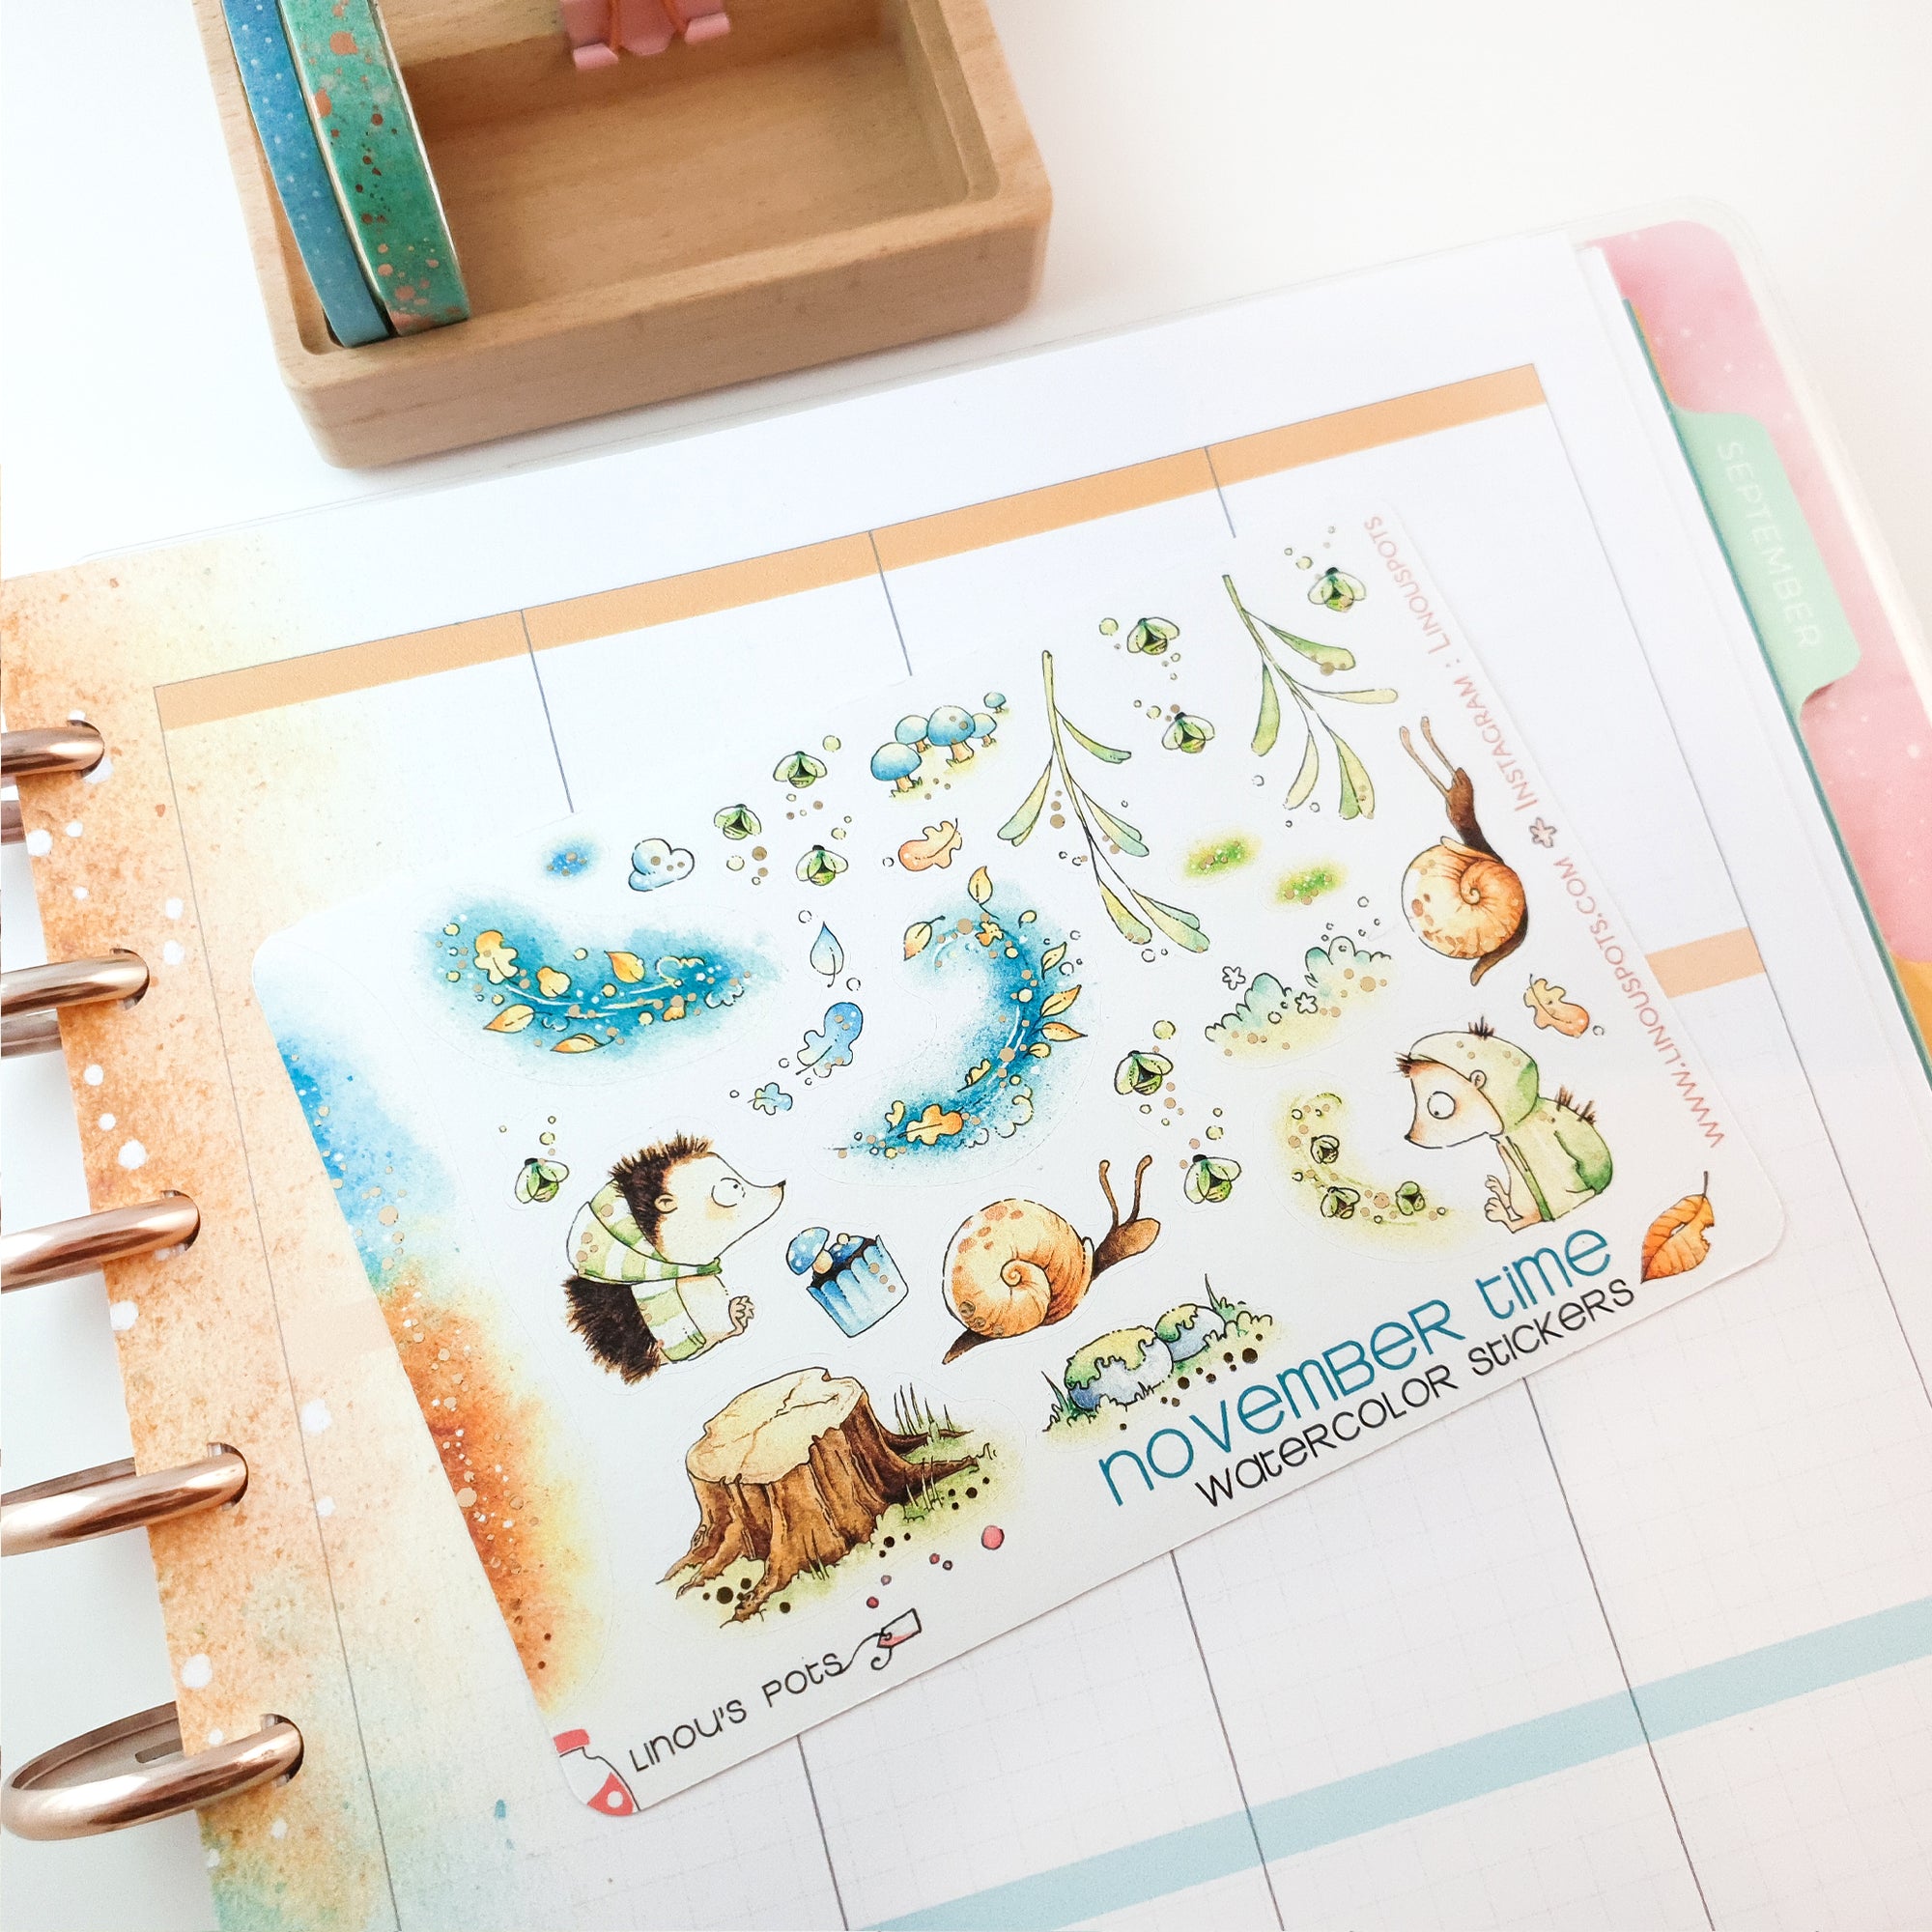 Watercolor stickers with foiled details with fall mood